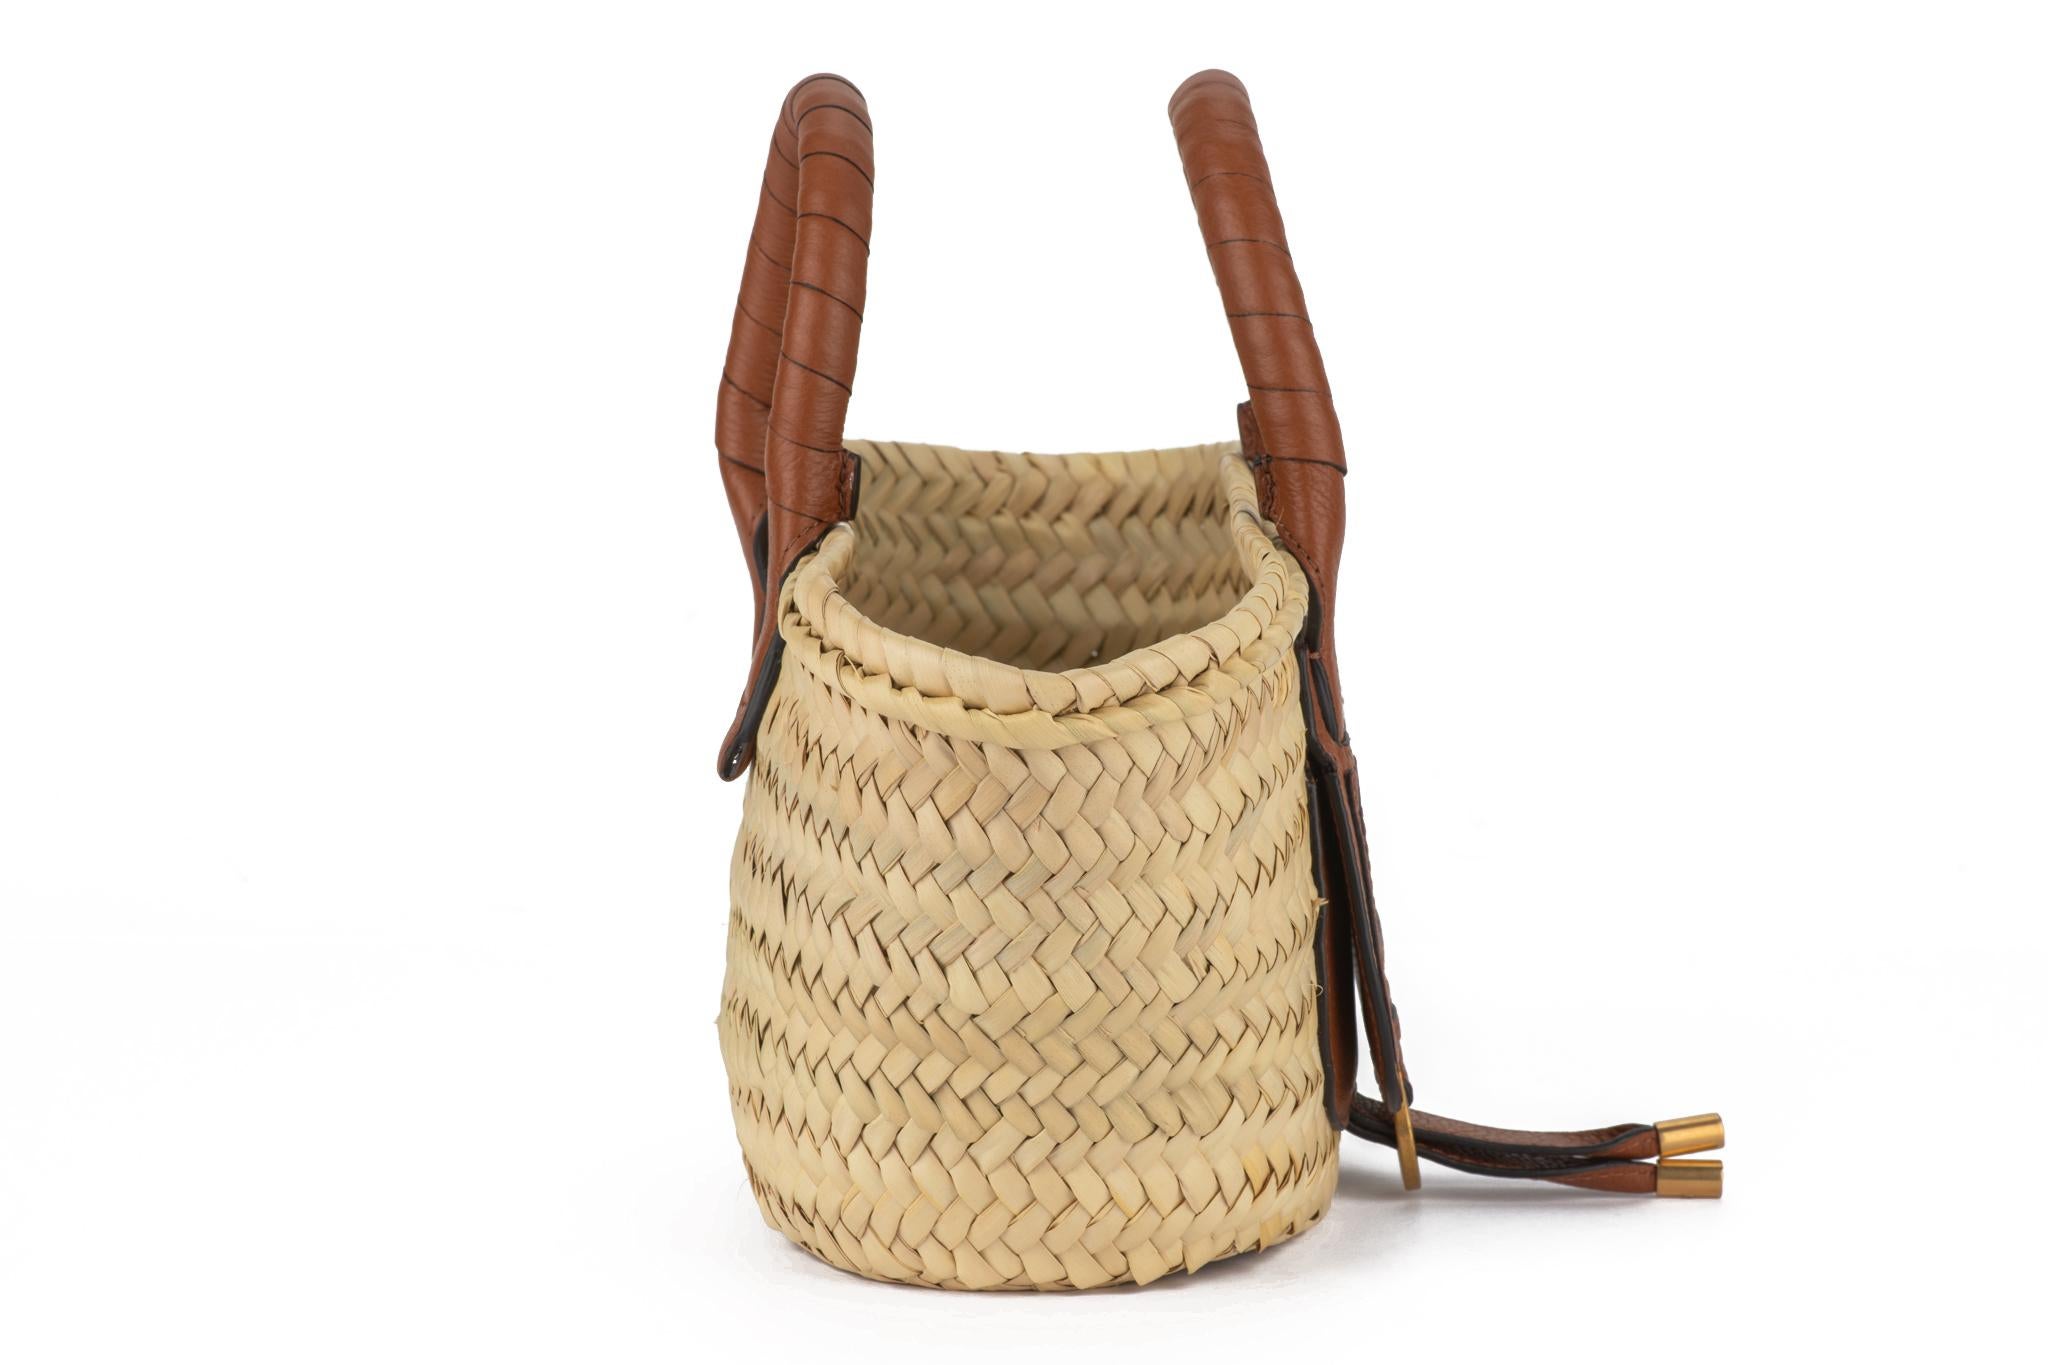 Chloe New Straw Leather Mini Basket In New Condition For Sale In West Hollywood, CA